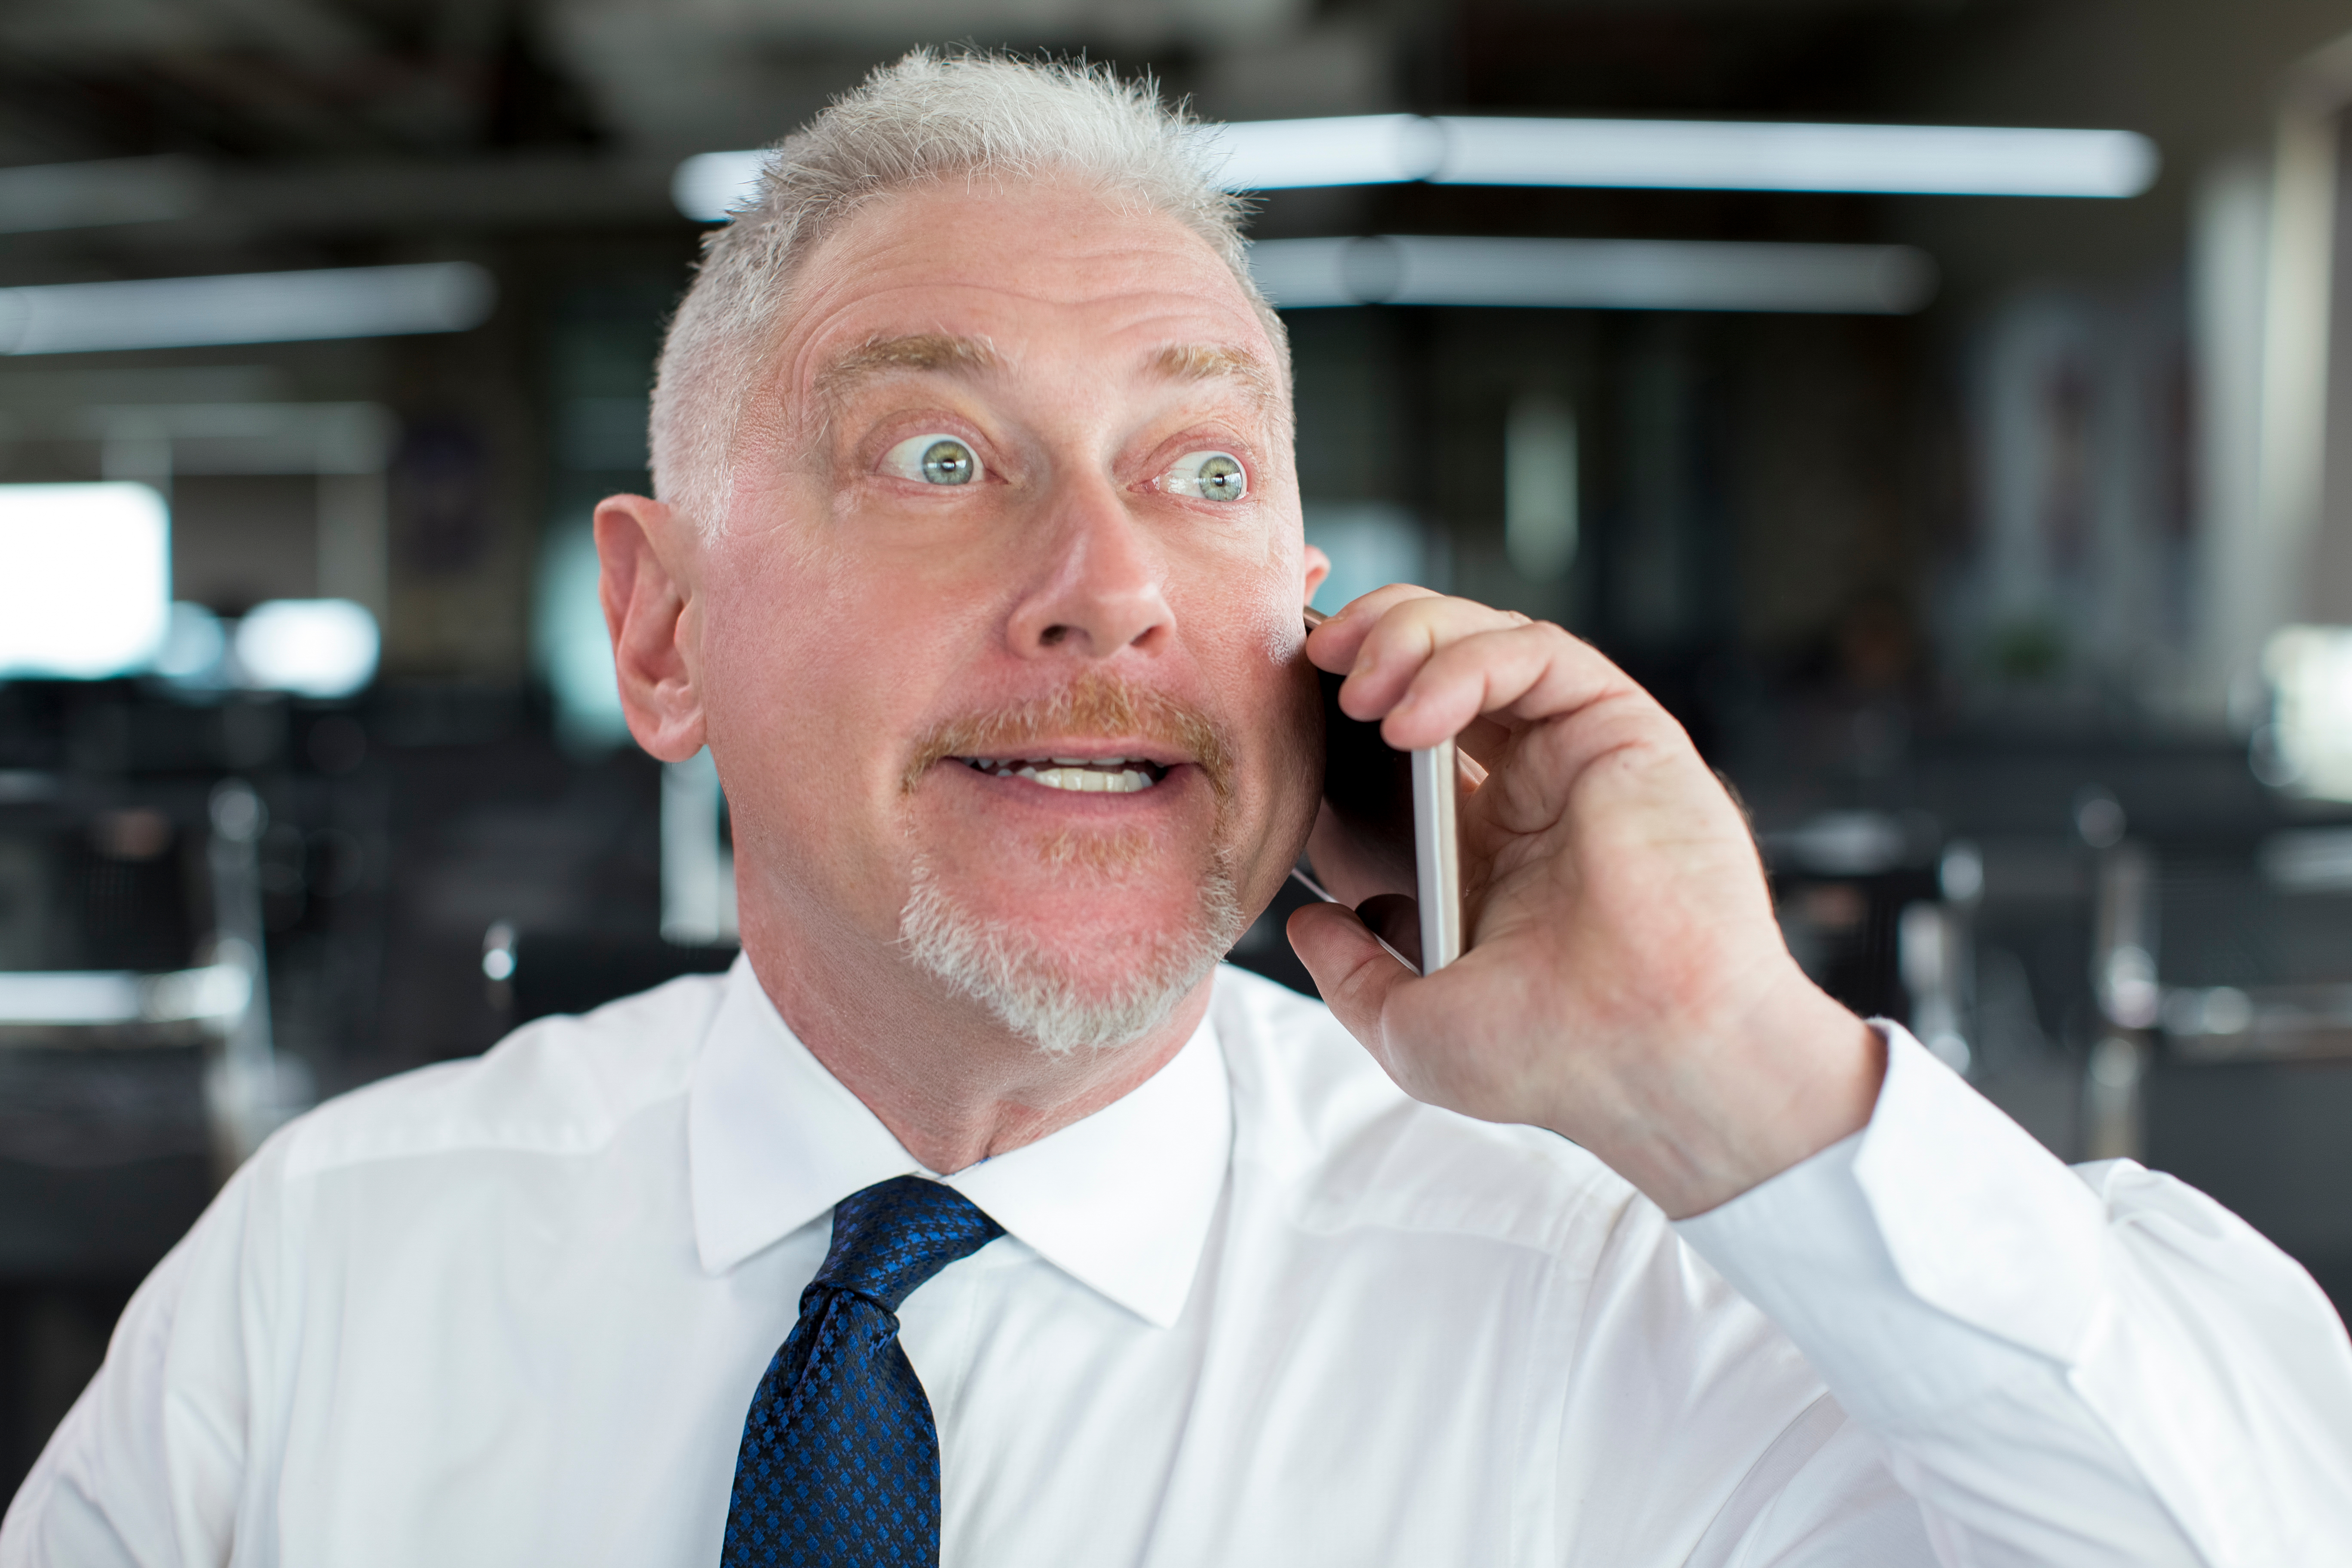 A man expressing anger on the phone | Source: Shutterstock